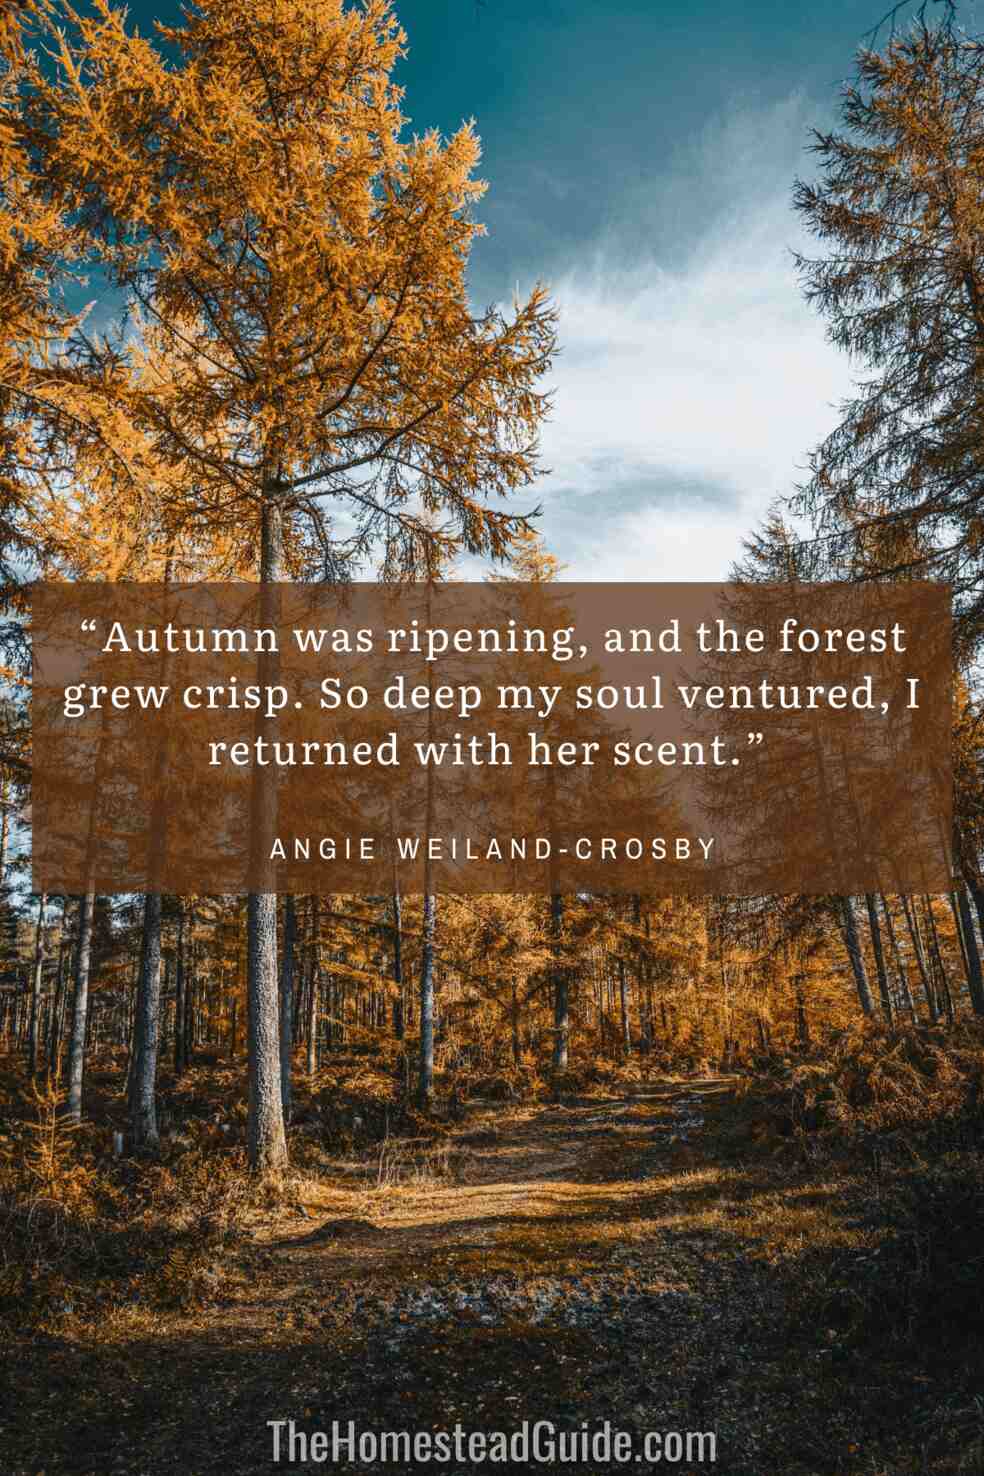 Autumn was ripening, and the forest grew crisp. So deep my soul ventured, I returned with her scent.